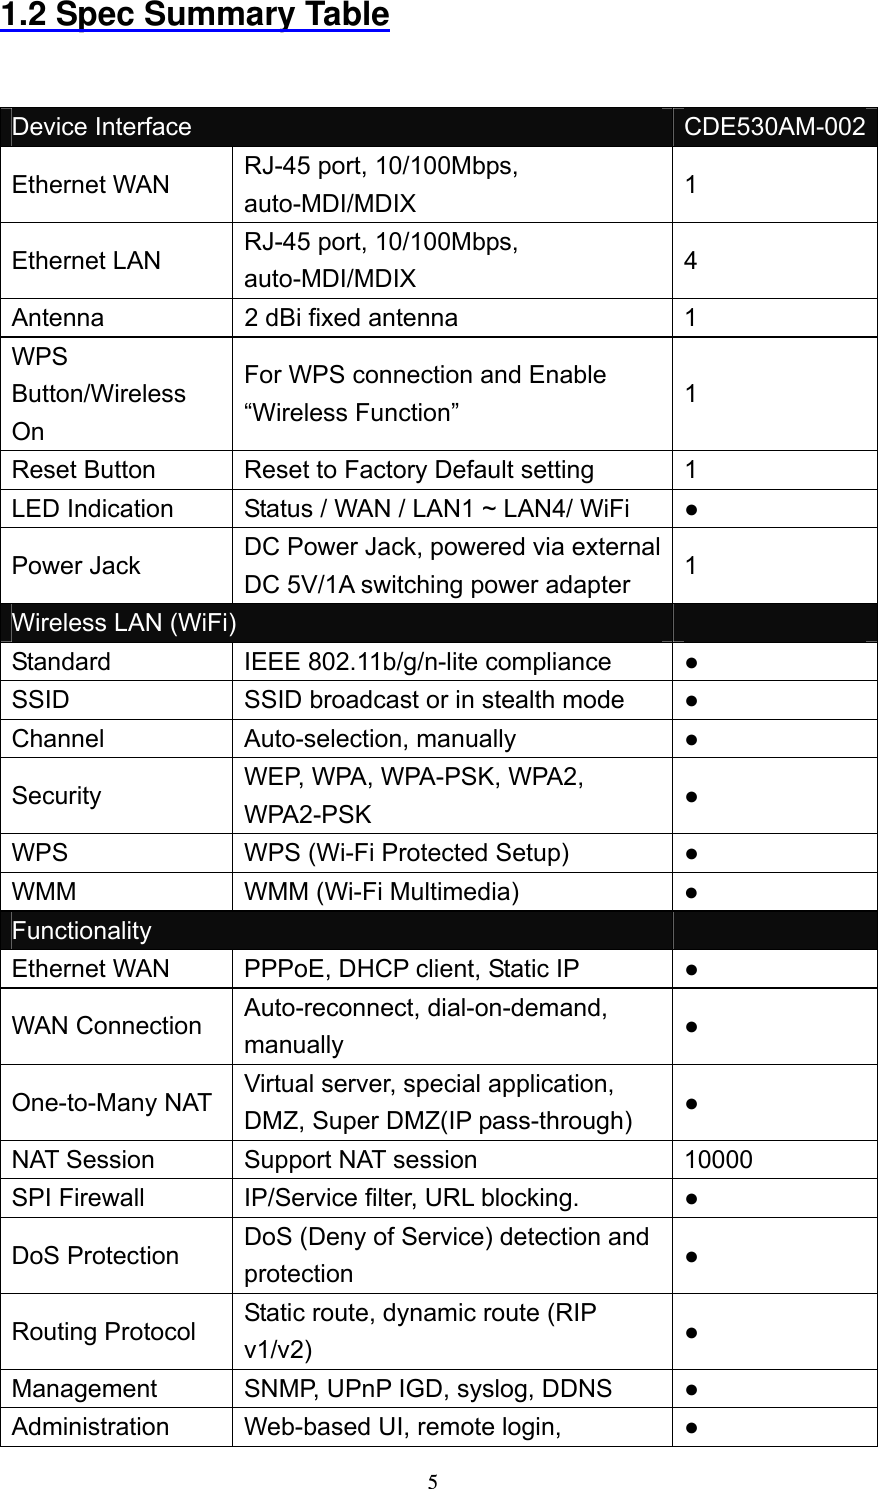  51.2 Spec Summary Table  Device Interface  CDE530AM-002Ethernet WAN  RJ-45 port, 10/100Mbps, auto-MDI/MDIX  1 Ethernet LAN  RJ-45 port, 10/100Mbps, auto-MDI/MDIX  4 Antenna                    2 dBi fixed antenna 1 WPS Button/Wireless On For WPS connection and Enable “Wireless Function”  1 Reset Button  Reset to Factory Default setting  1 LED Indication  Status / WAN / LAN1 ~ LAN4/ WiFi  ● Power Jack  DC Power Jack, powered via external DC 5V/1A switching power adapter  1 Wireless LAN (WiFi)   Standard  IEEE 802.11b/g/n-lite compliance  ● SSID  SSID broadcast or in stealth mode  ● Channel Auto-selection, manually  ● Security  WEP, WPA, WPA-PSK, WPA2, WPA2-PSK ● WPS  WPS (Wi-Fi Protected Setup)  ● WMM WMM (Wi-Fi Multimedia) ● Functionality   Ethernet WAN  PPPoE, DHCP client, Static IP  ● WAN Connection  Auto-reconnect, dial-on-demand, manually ● One-to-Many NAT  Virtual server, special application, DMZ, Super DMZ(IP pass-through) ● NAT Session  Support NAT session  10000 SPI Firewall  IP/Service filter, URL blocking.  ● DoS Protection  DoS (Deny of Service) detection and protection ● Routing Protocol  Static route, dynamic route (RIP v1/v2) ● Management  SNMP, UPnP IGD, syslog, DDNS      ● Administration Web-based UI, remote login,  ● 